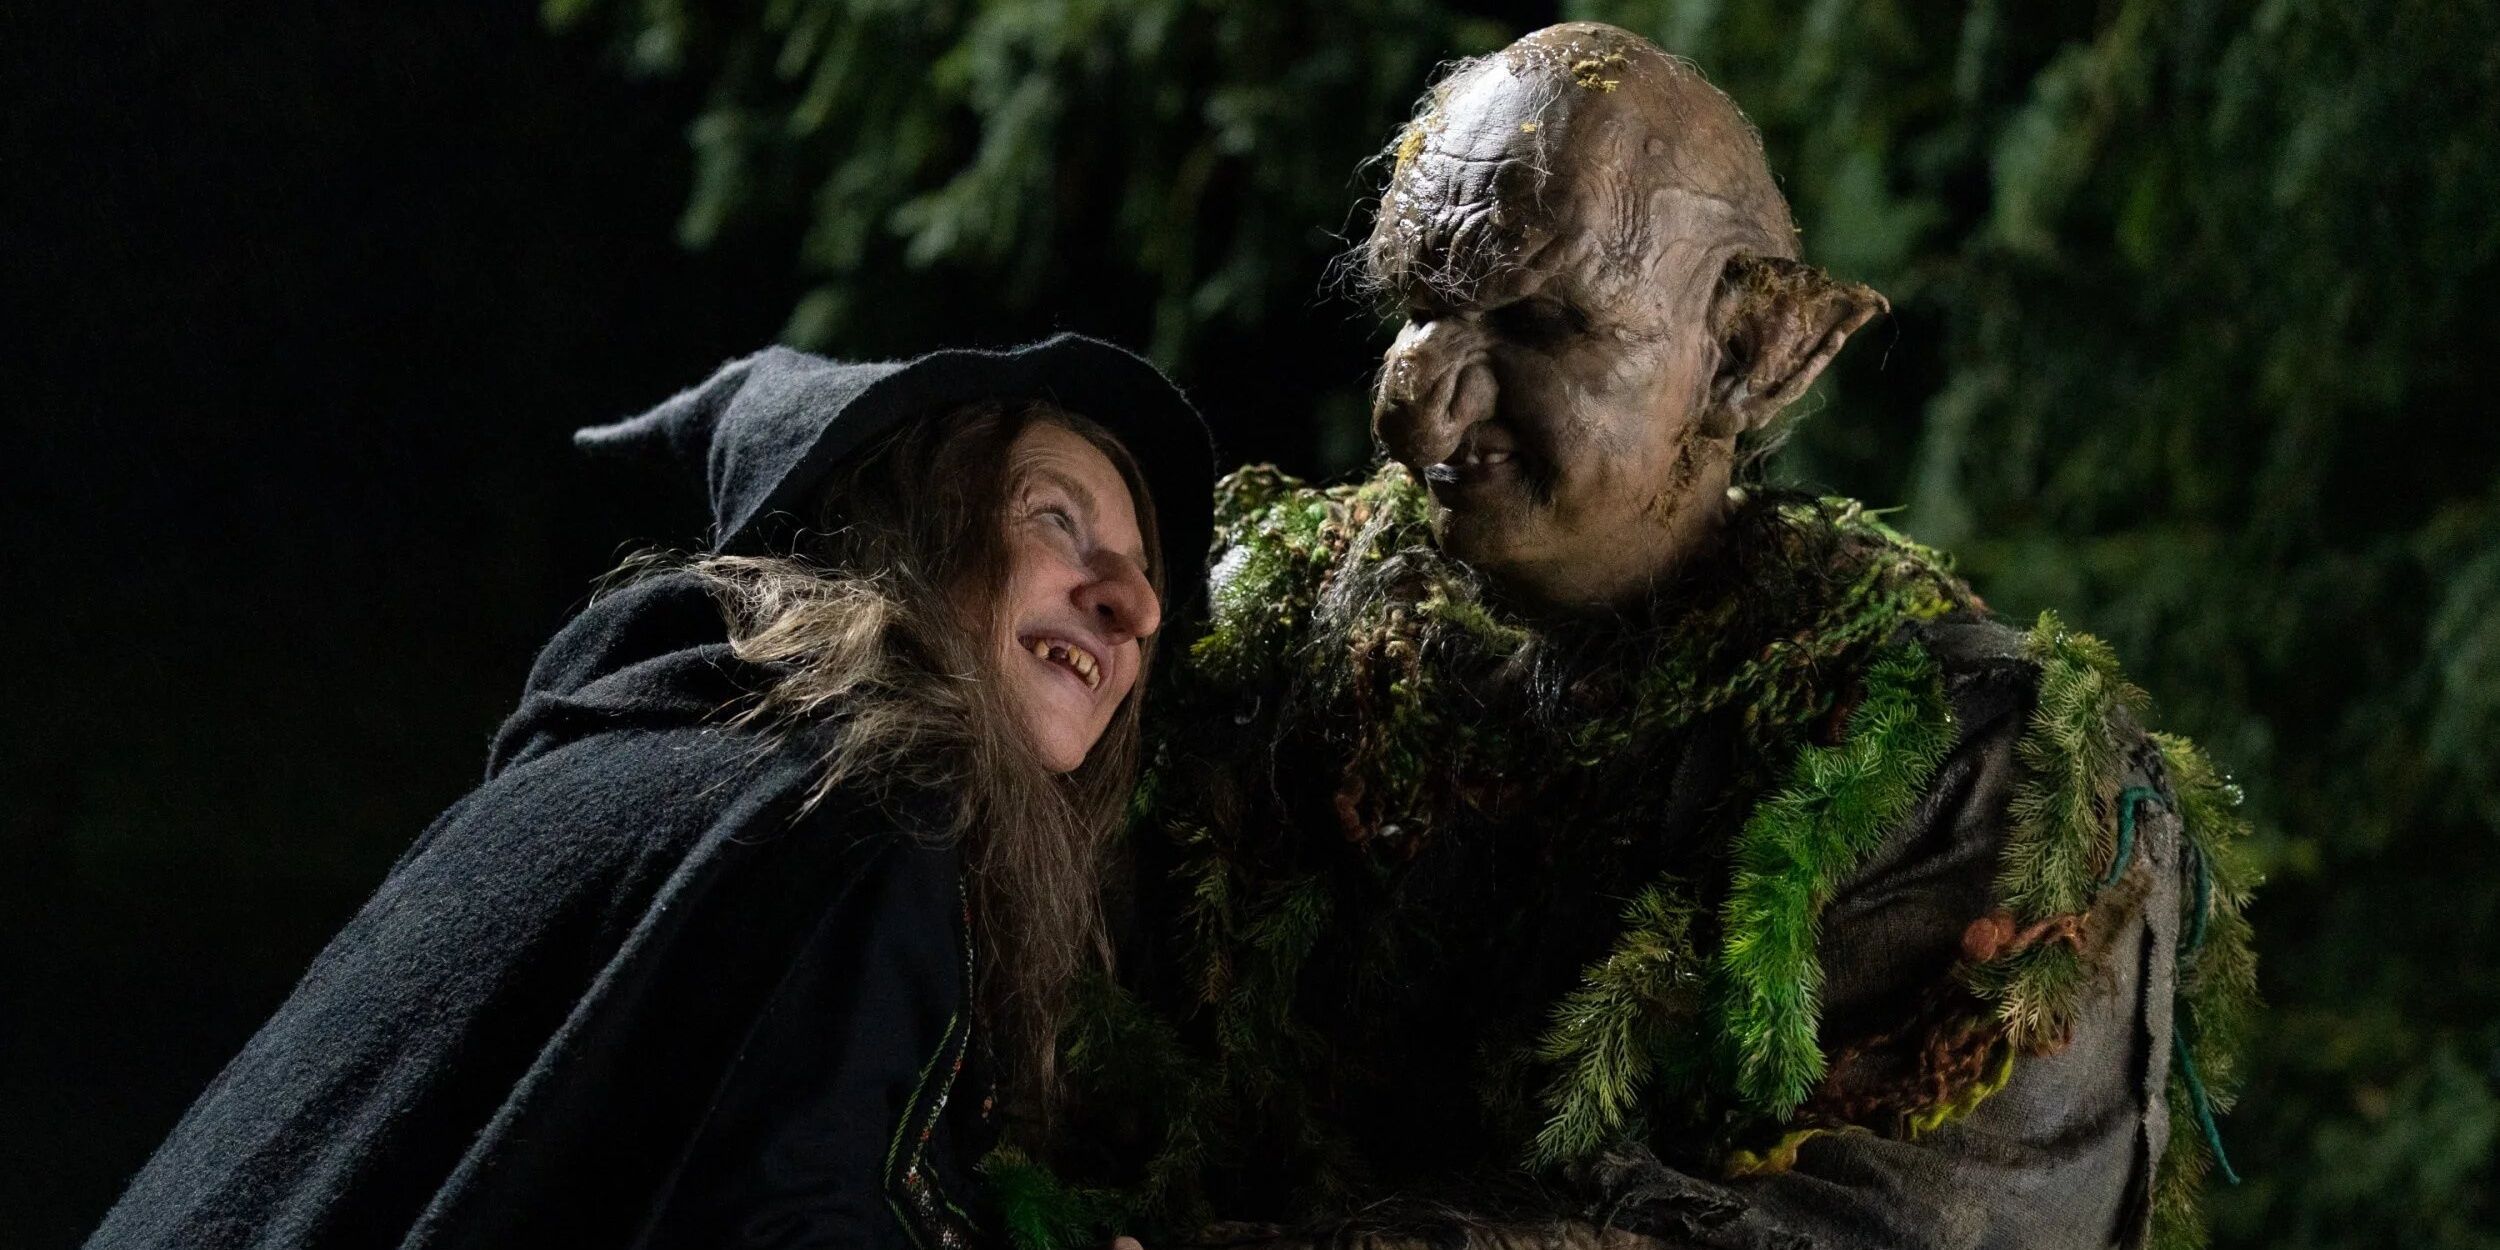 The troll hangs out with the witch in Hansel And Gretel After Ever After.